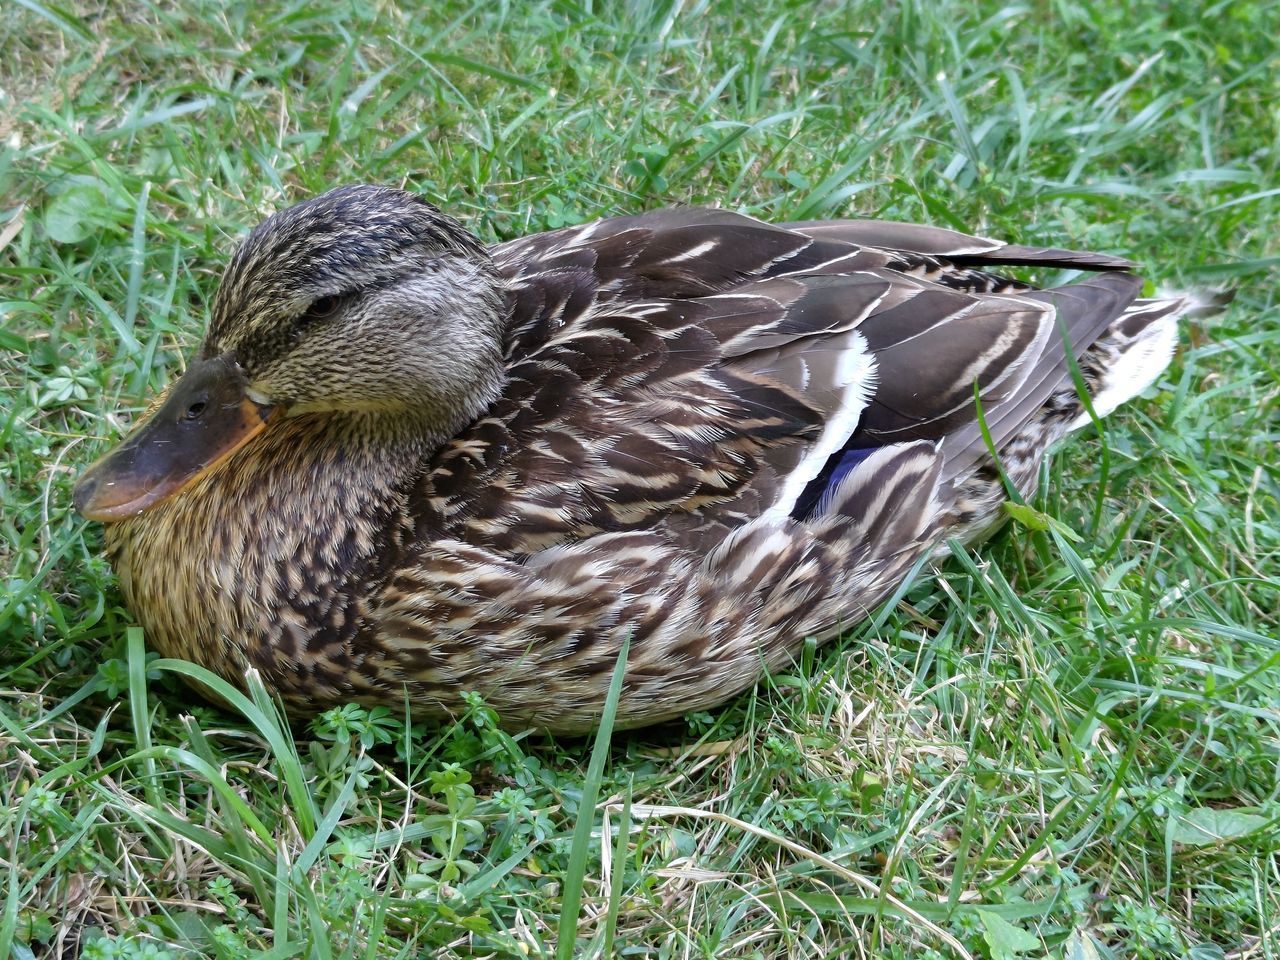 animal themes, duck, animal, mallard, bird, grass, animal wildlife, ducks, geese and swans, wildlife, water bird, beak, plant, one animal, nature, mallard duck, poultry, field, land, no people, green, day, high angle view, wing, outdoors, close-up